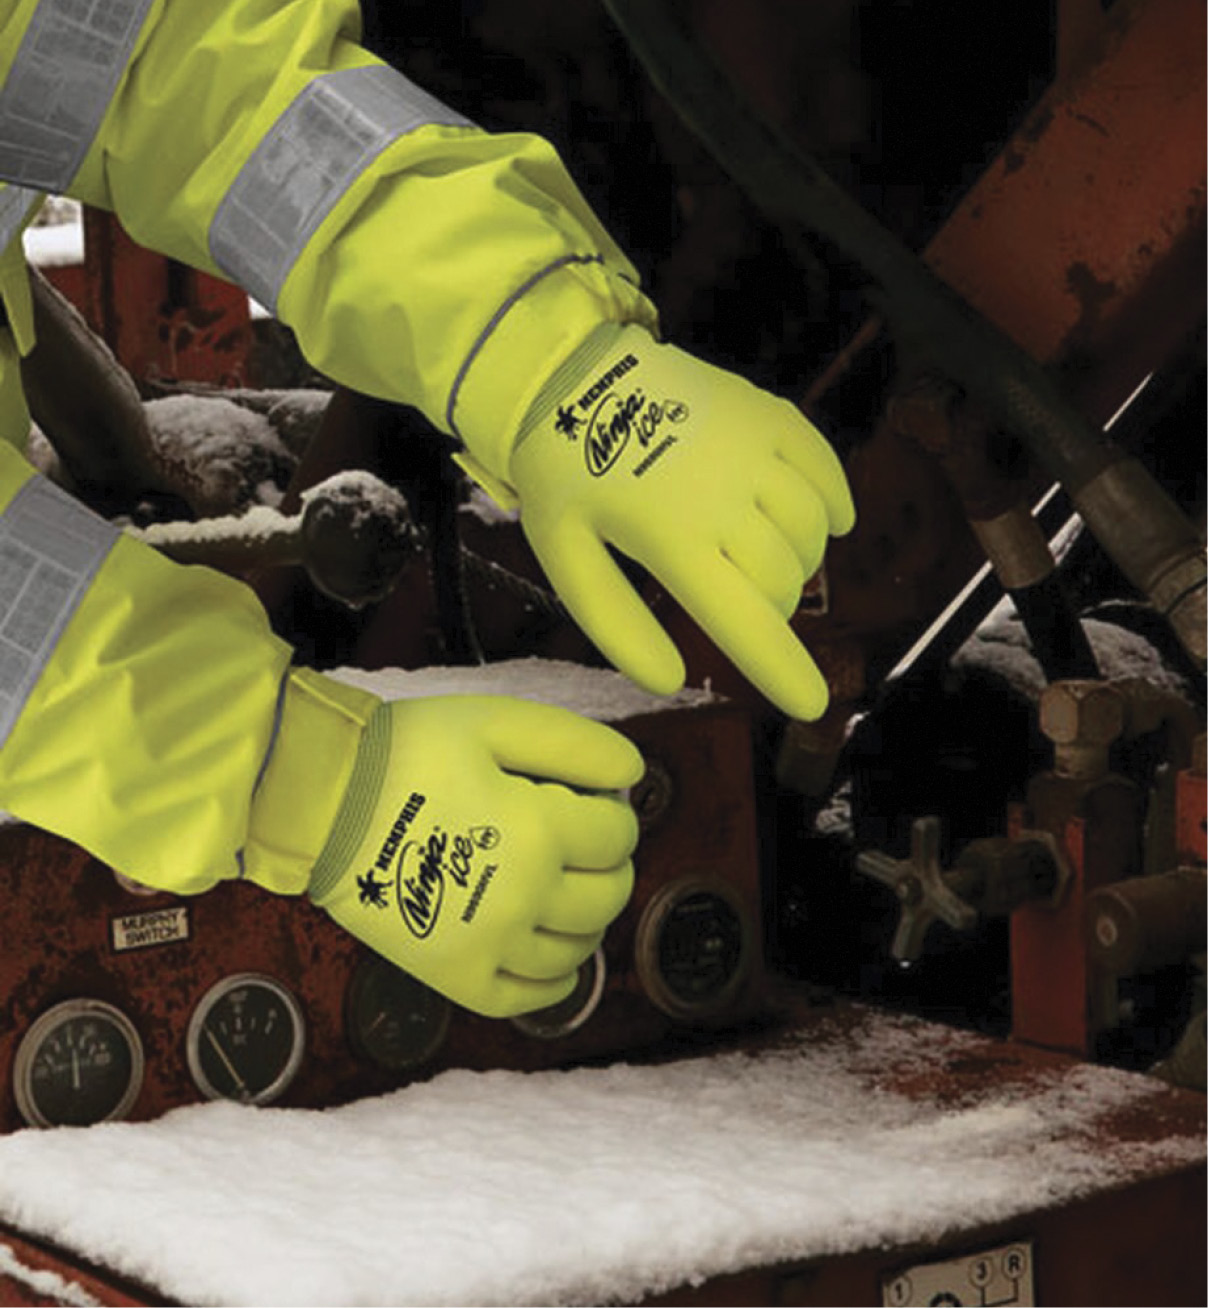 Clearing up misconceptions about cut-resistant gloves